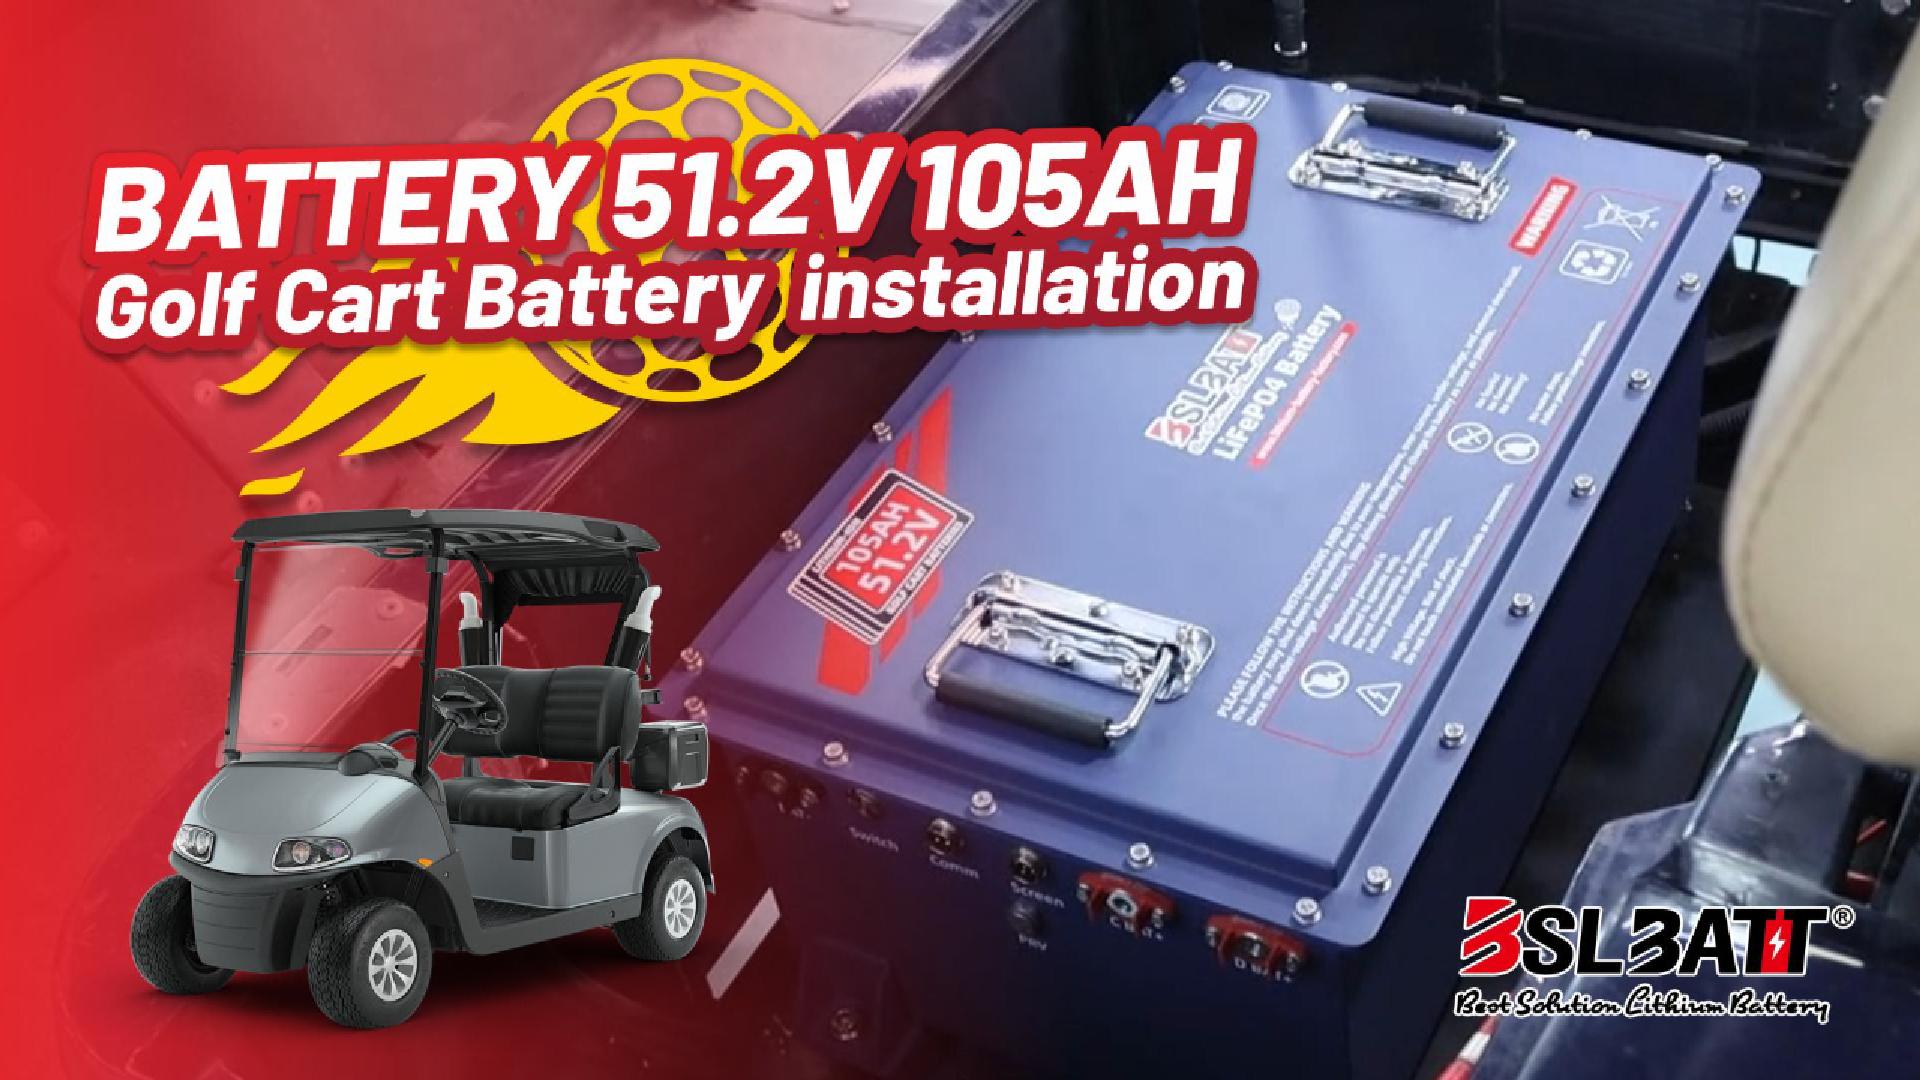 How to Upgrade Your Golf Cart to Lithium Batteries I BSLBATT